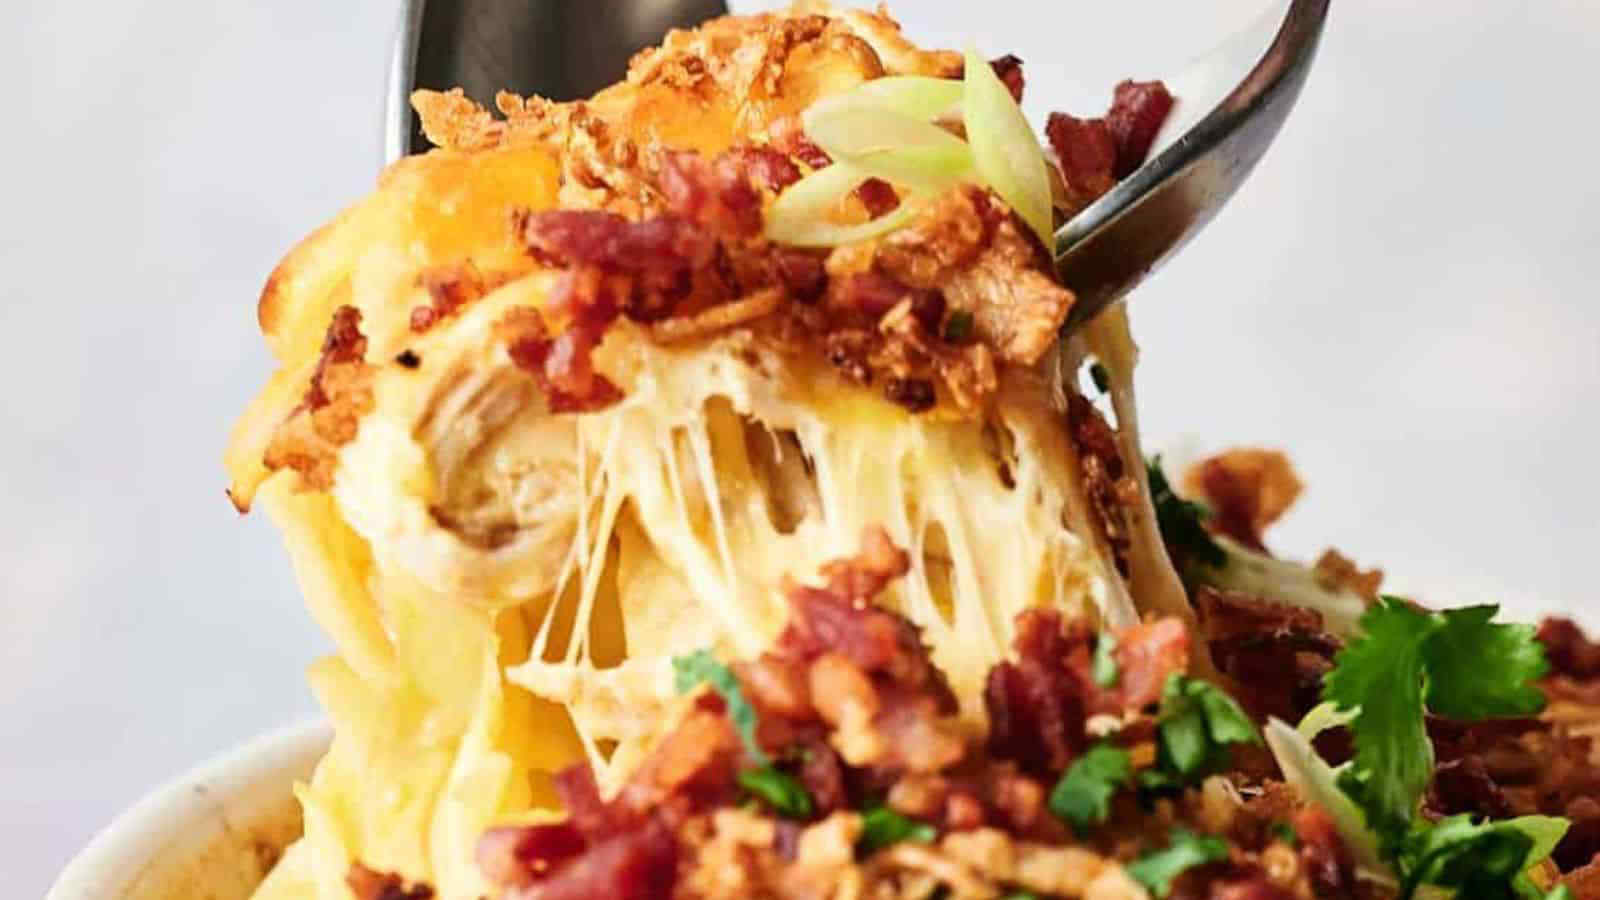 The Ultimate Comfort Food! 21 Casserole Recipes Your Family Will Beg For